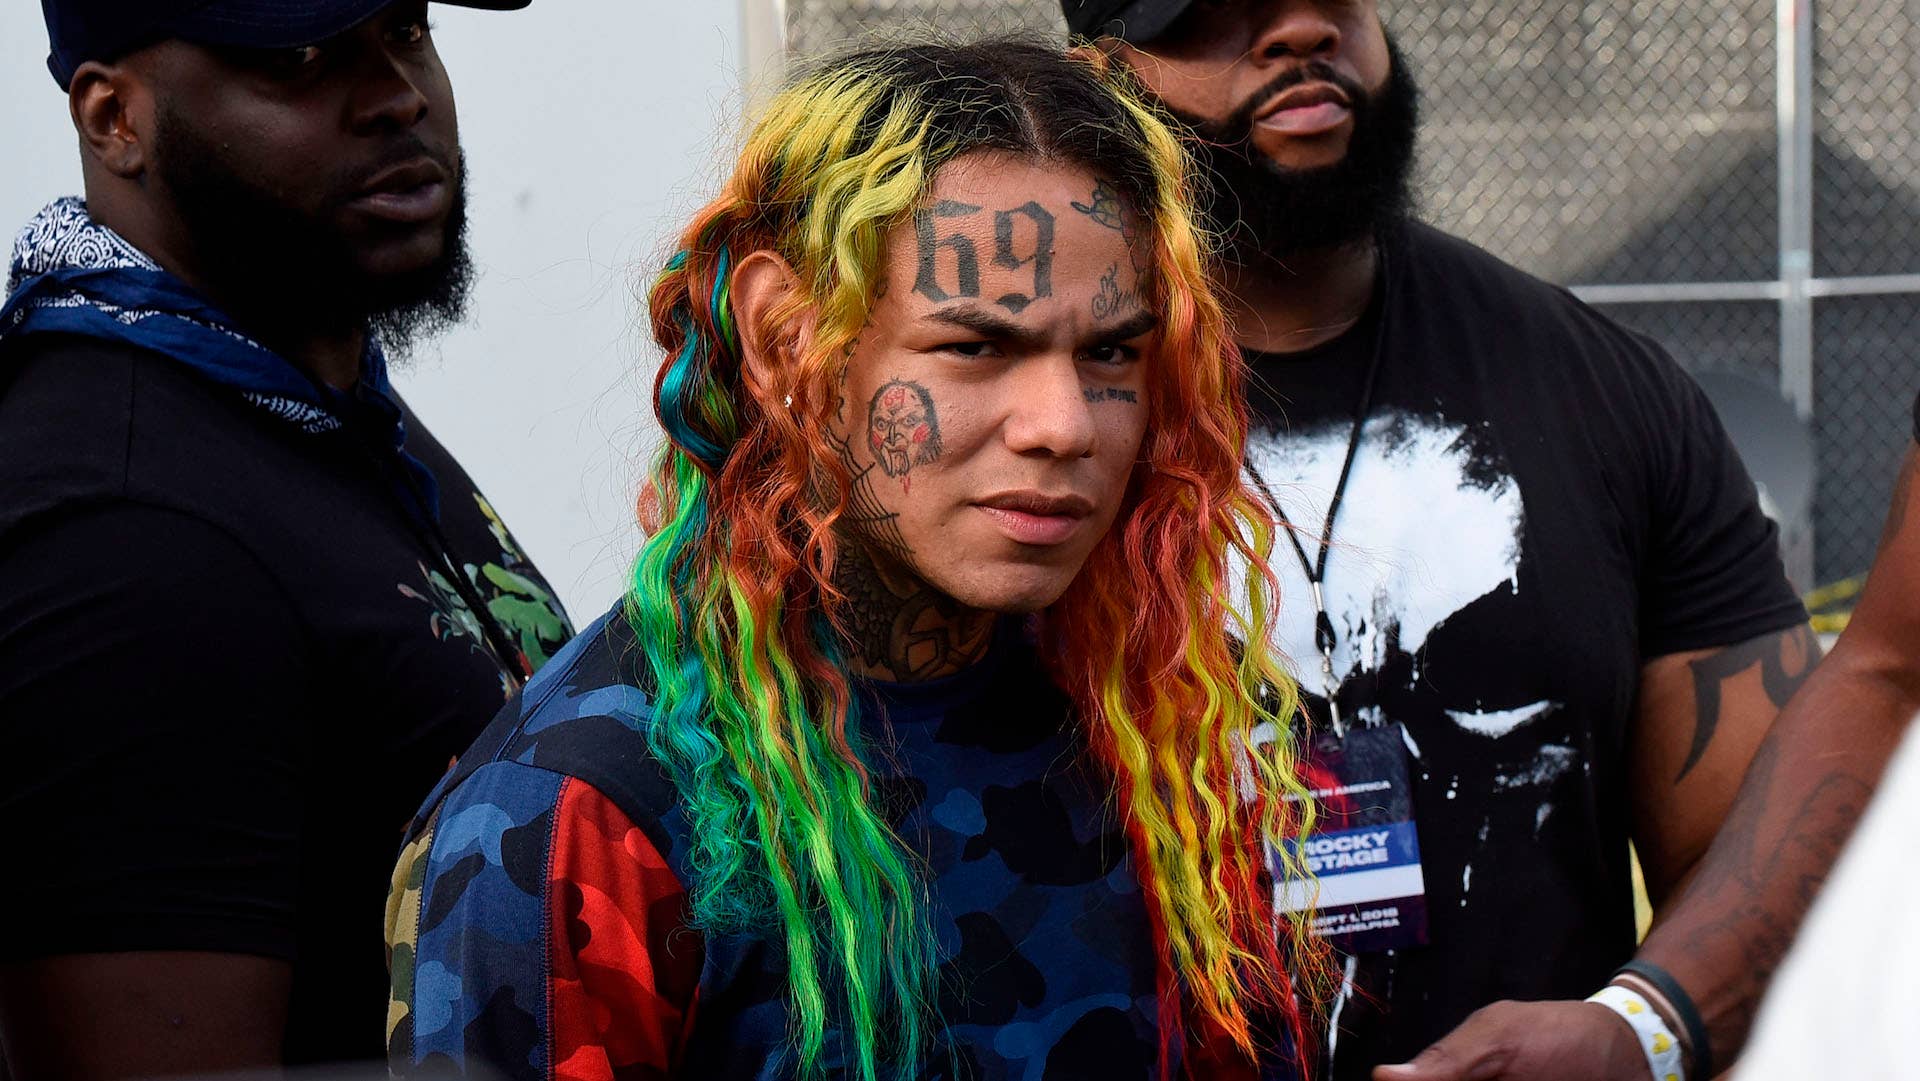 Tekashi 6IX9INE performs at Made in America Music Festival